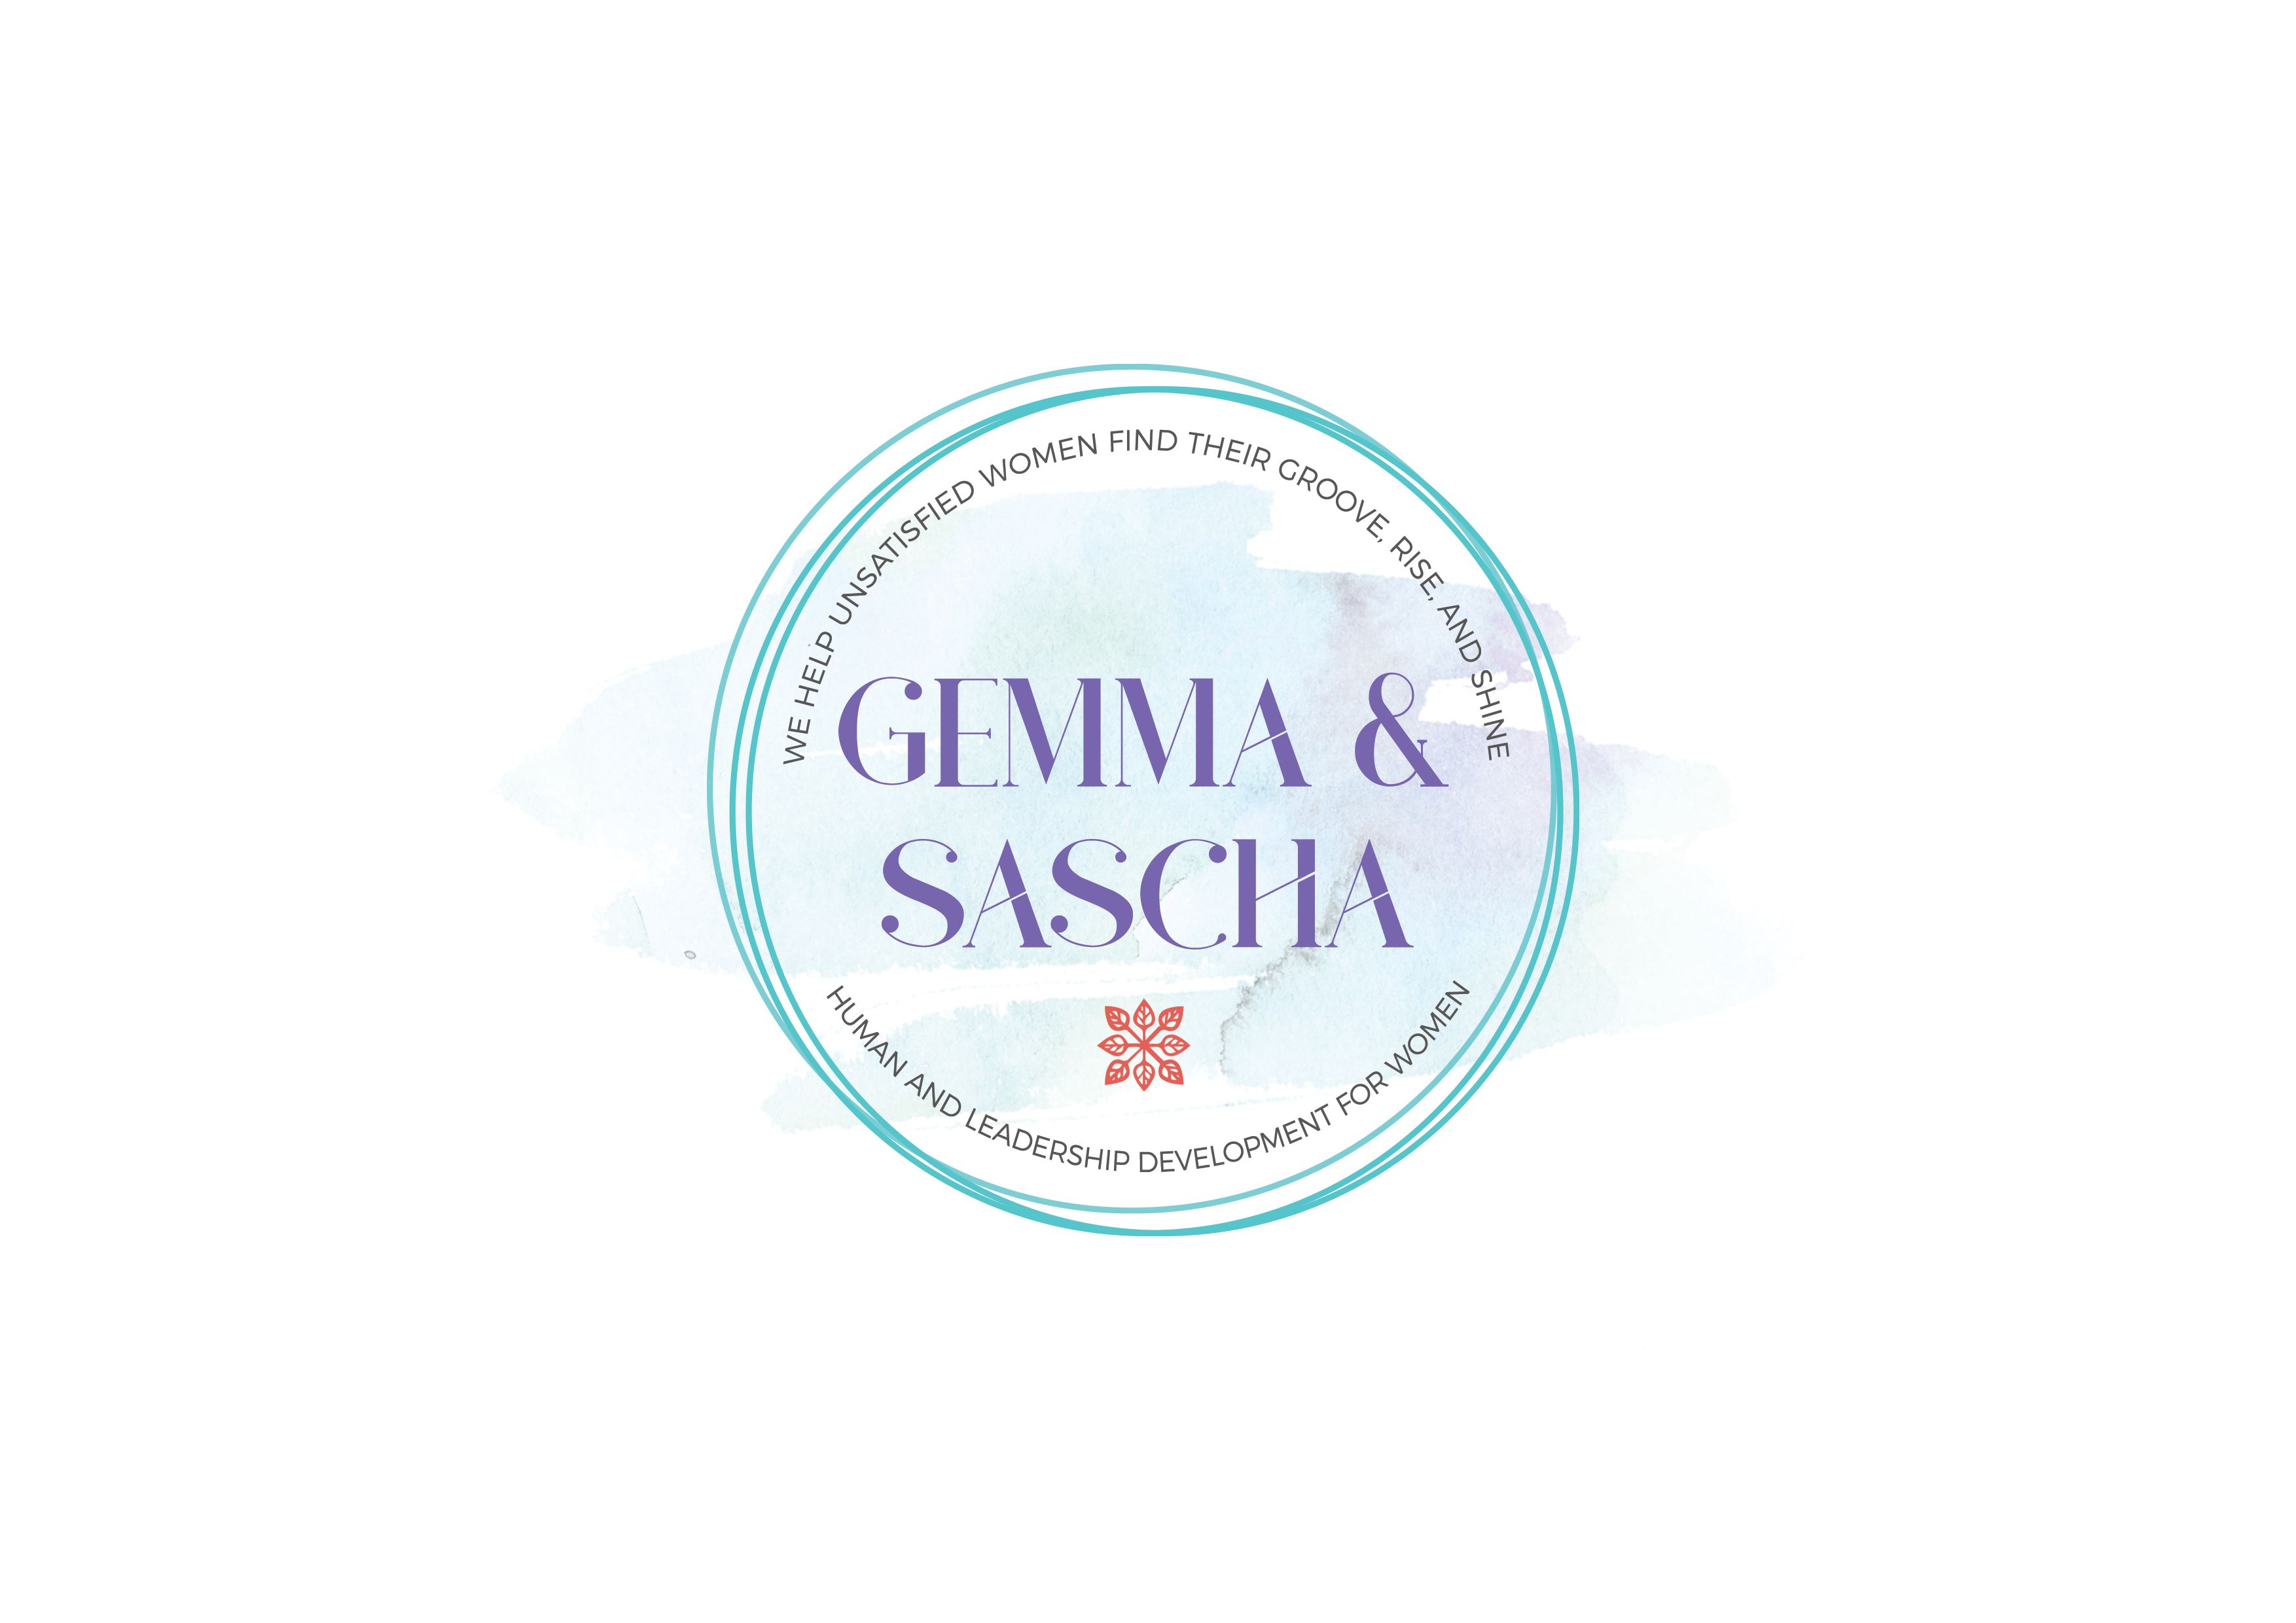 the Global Network of Success with Gemma & Sascha